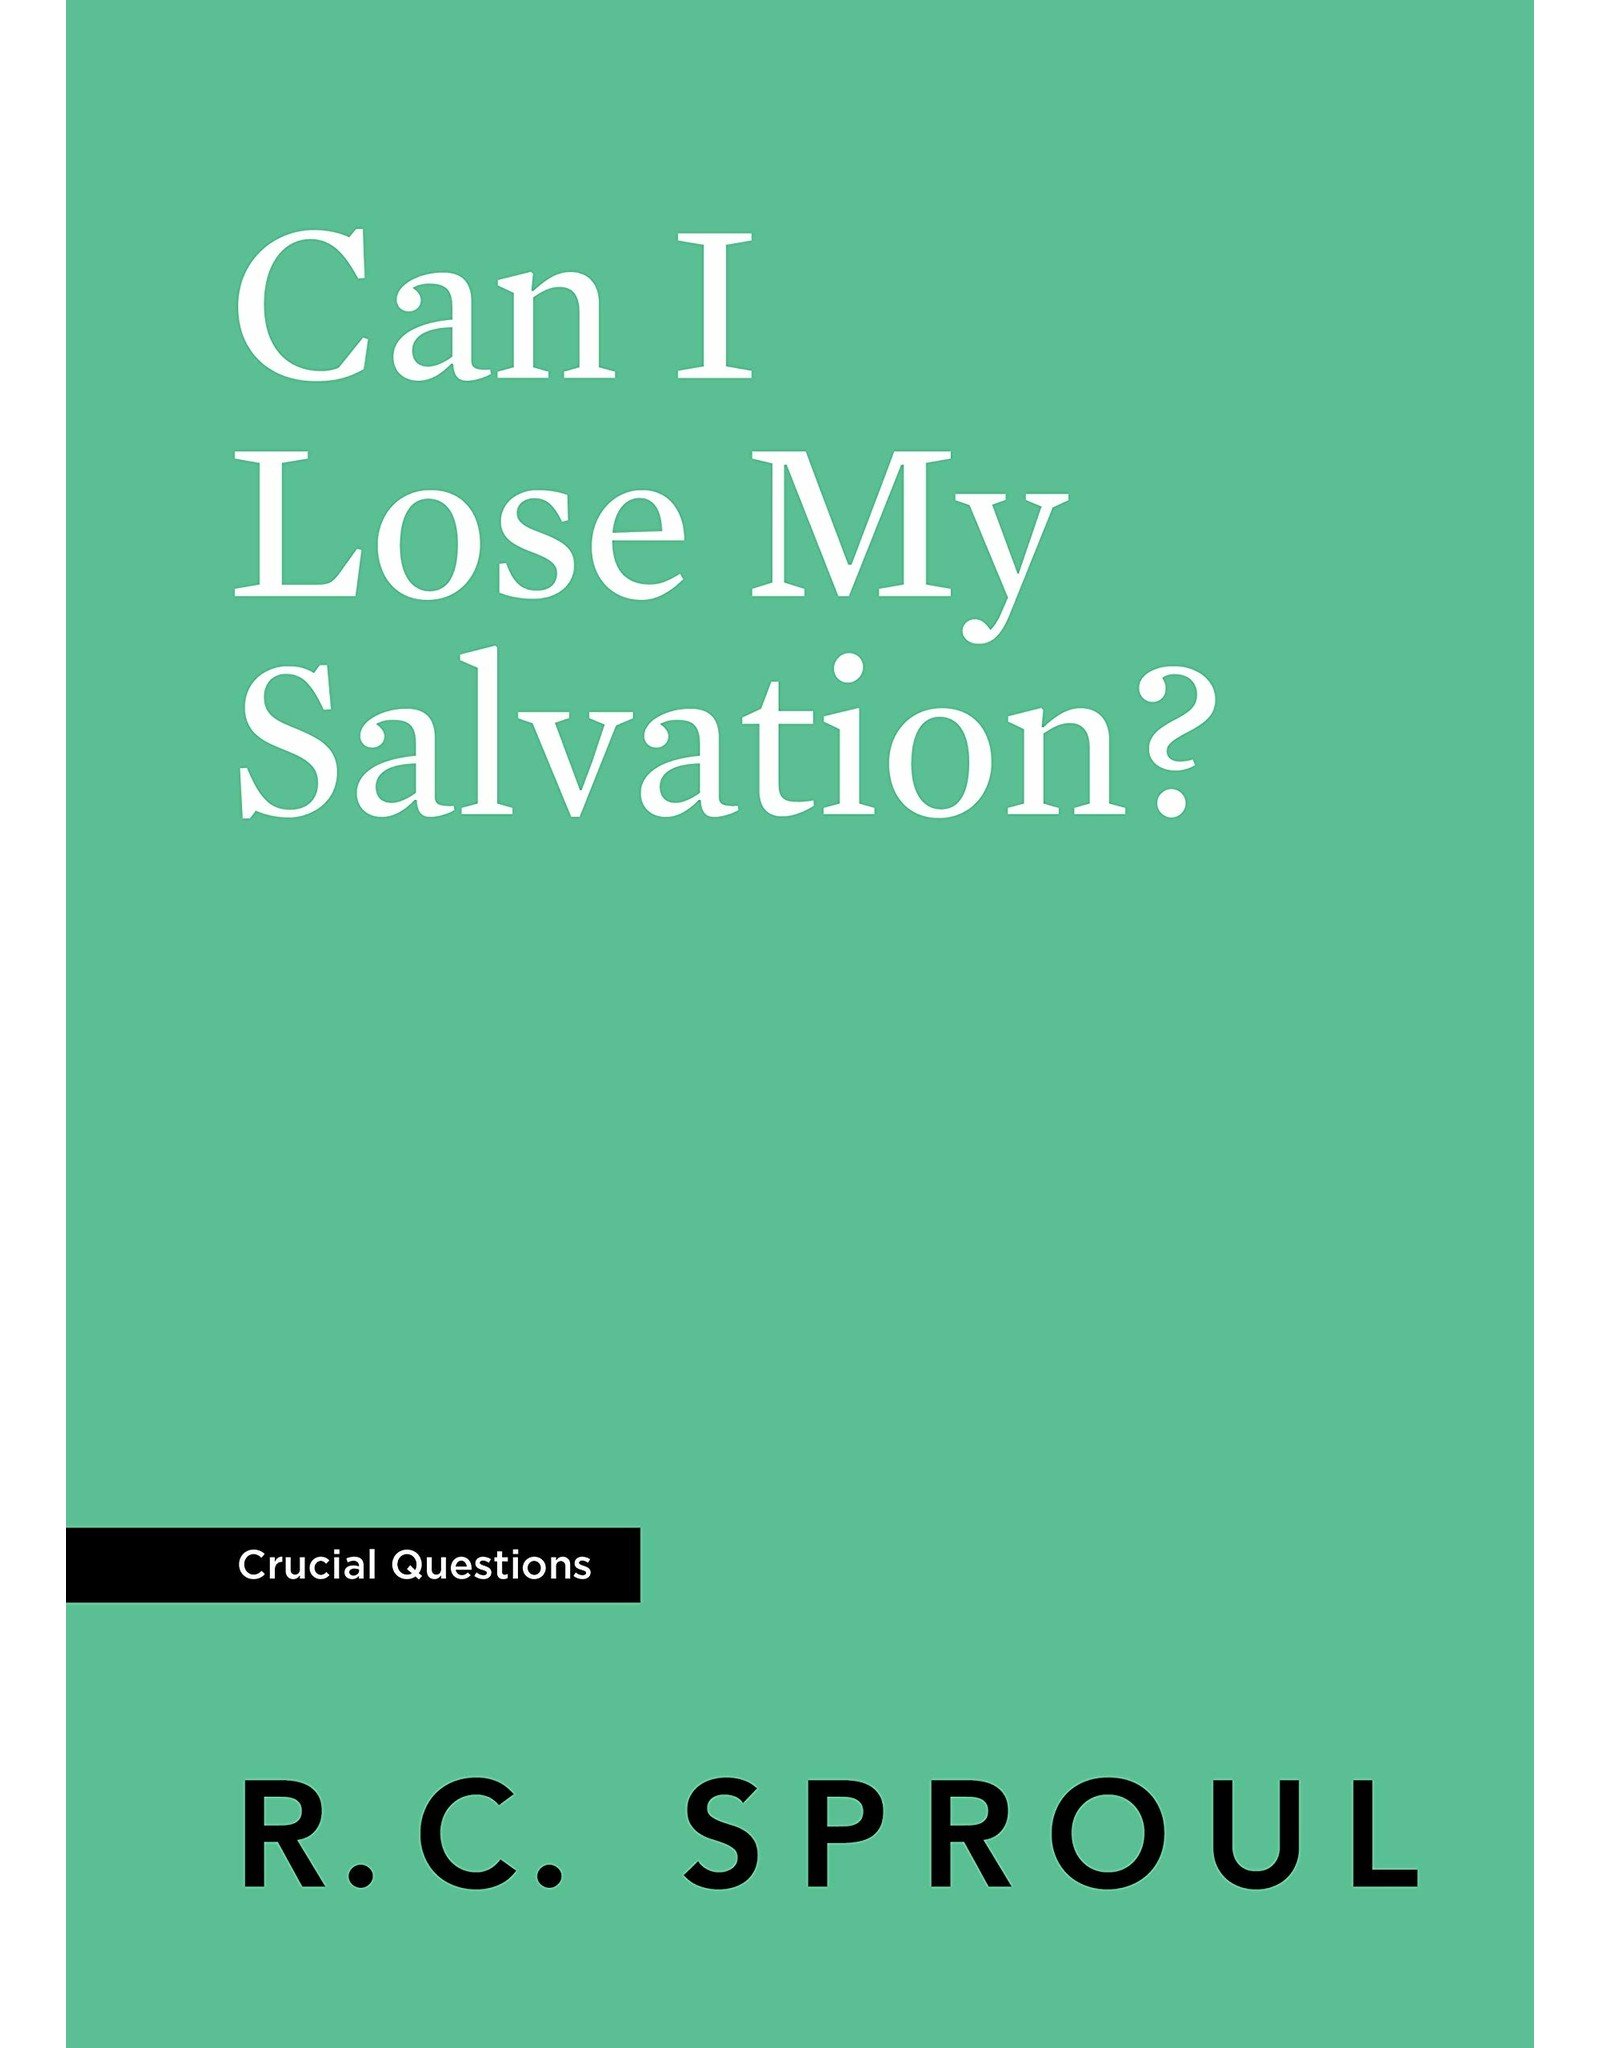 Ligonier / Reformation Trust Can I Lose My Salvation? (Crucial Questions)